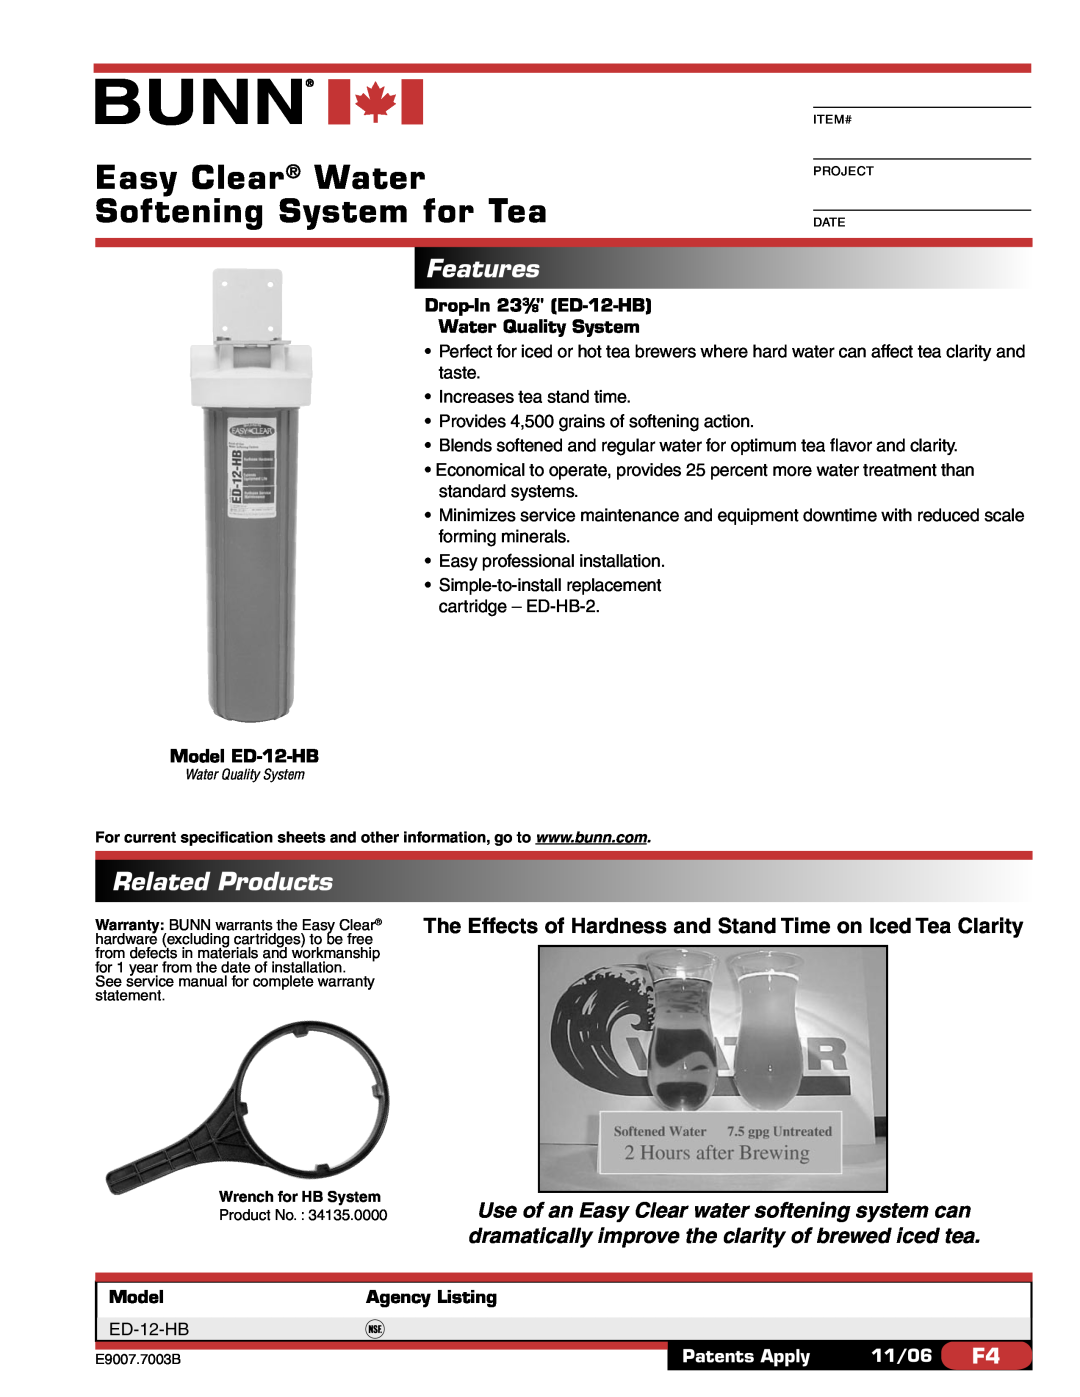 Bunn specifications Features, Related Products, Easy Clear Water Softening System for Tea, Model ED-12-HB, 11/06 